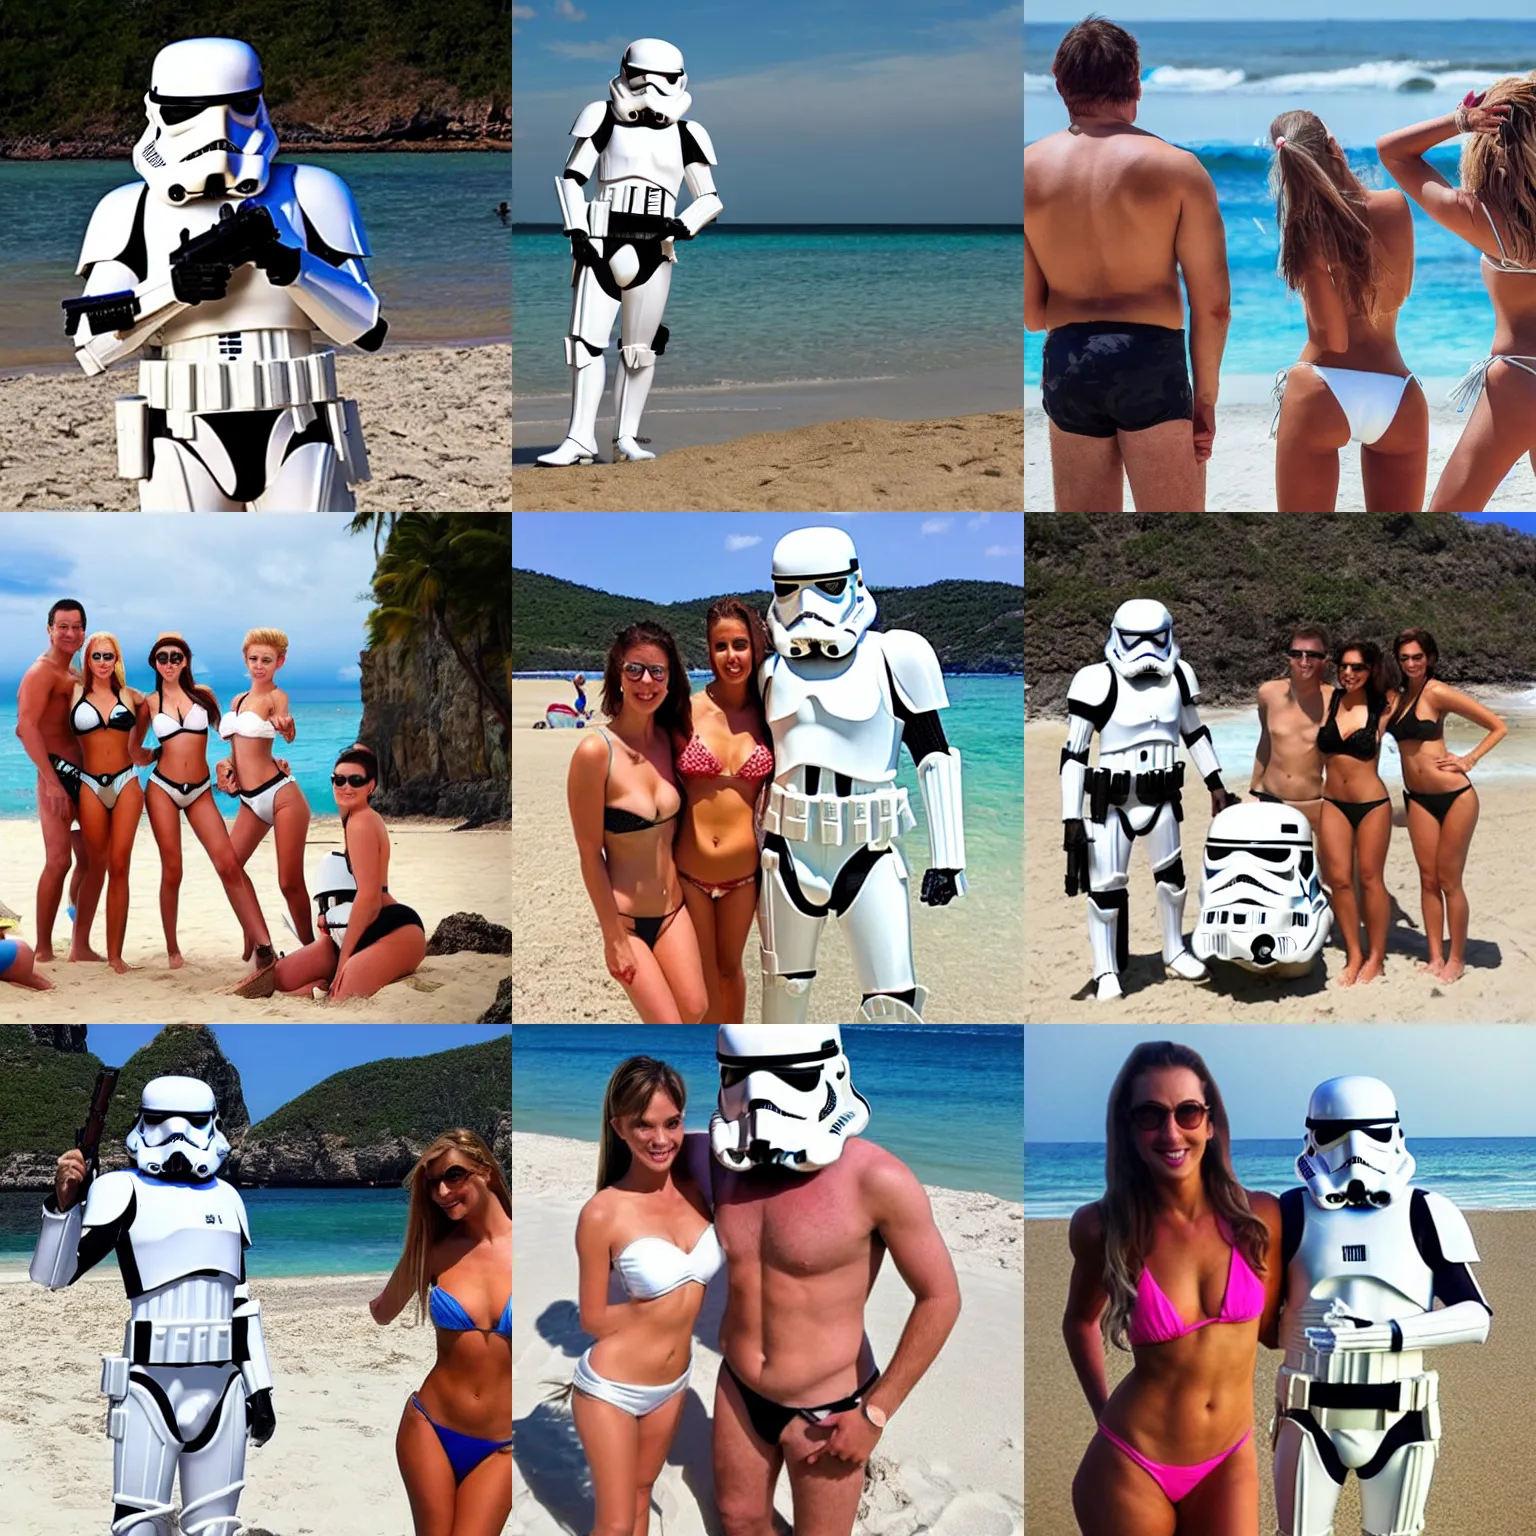 Prompt: vacation photo of storm trooper on beach holiday with bikini models